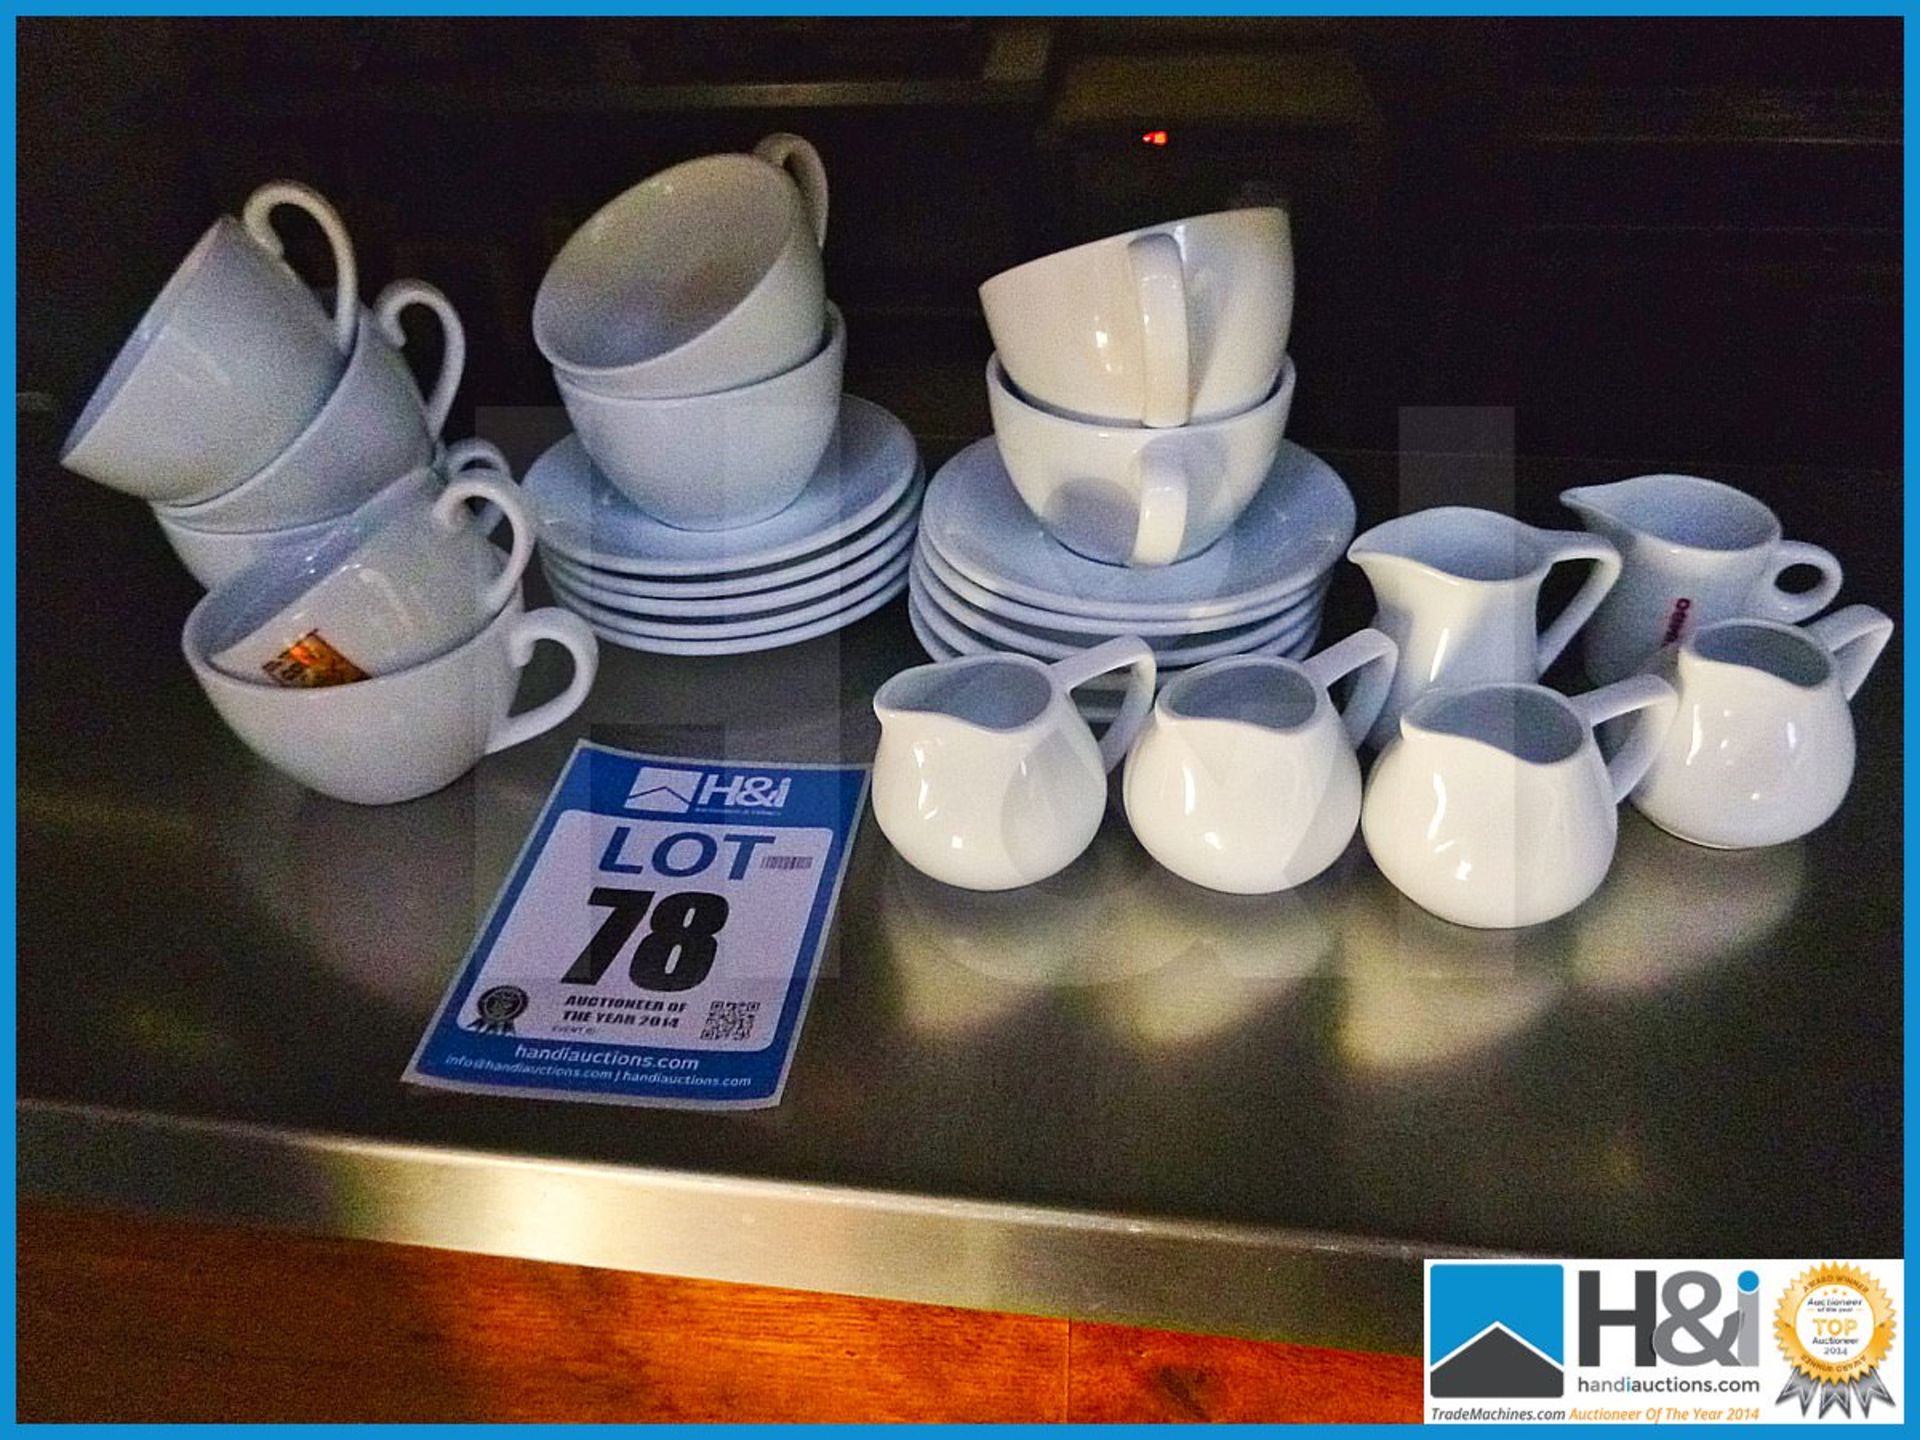 Quantity of cups, saucers and milk jugs